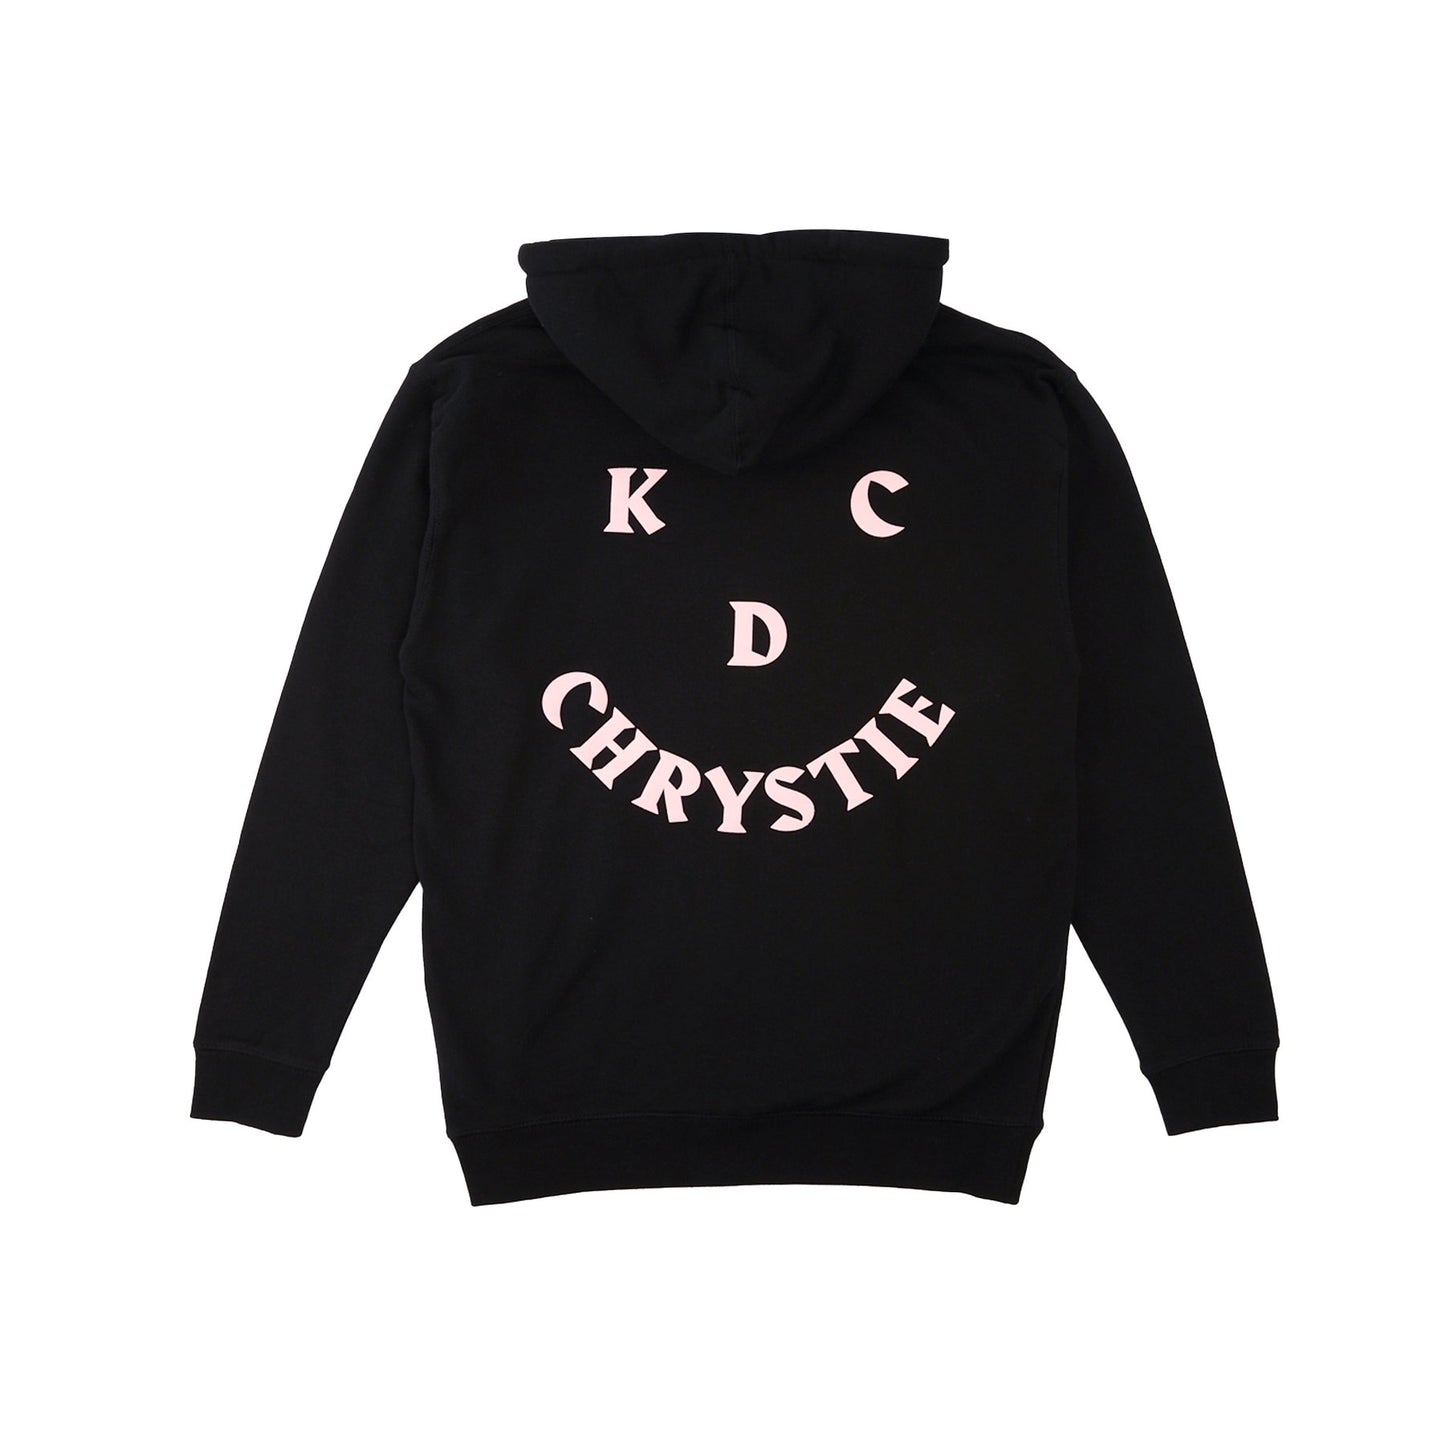 Chrystie NYC x KCDC Smile Hoodie